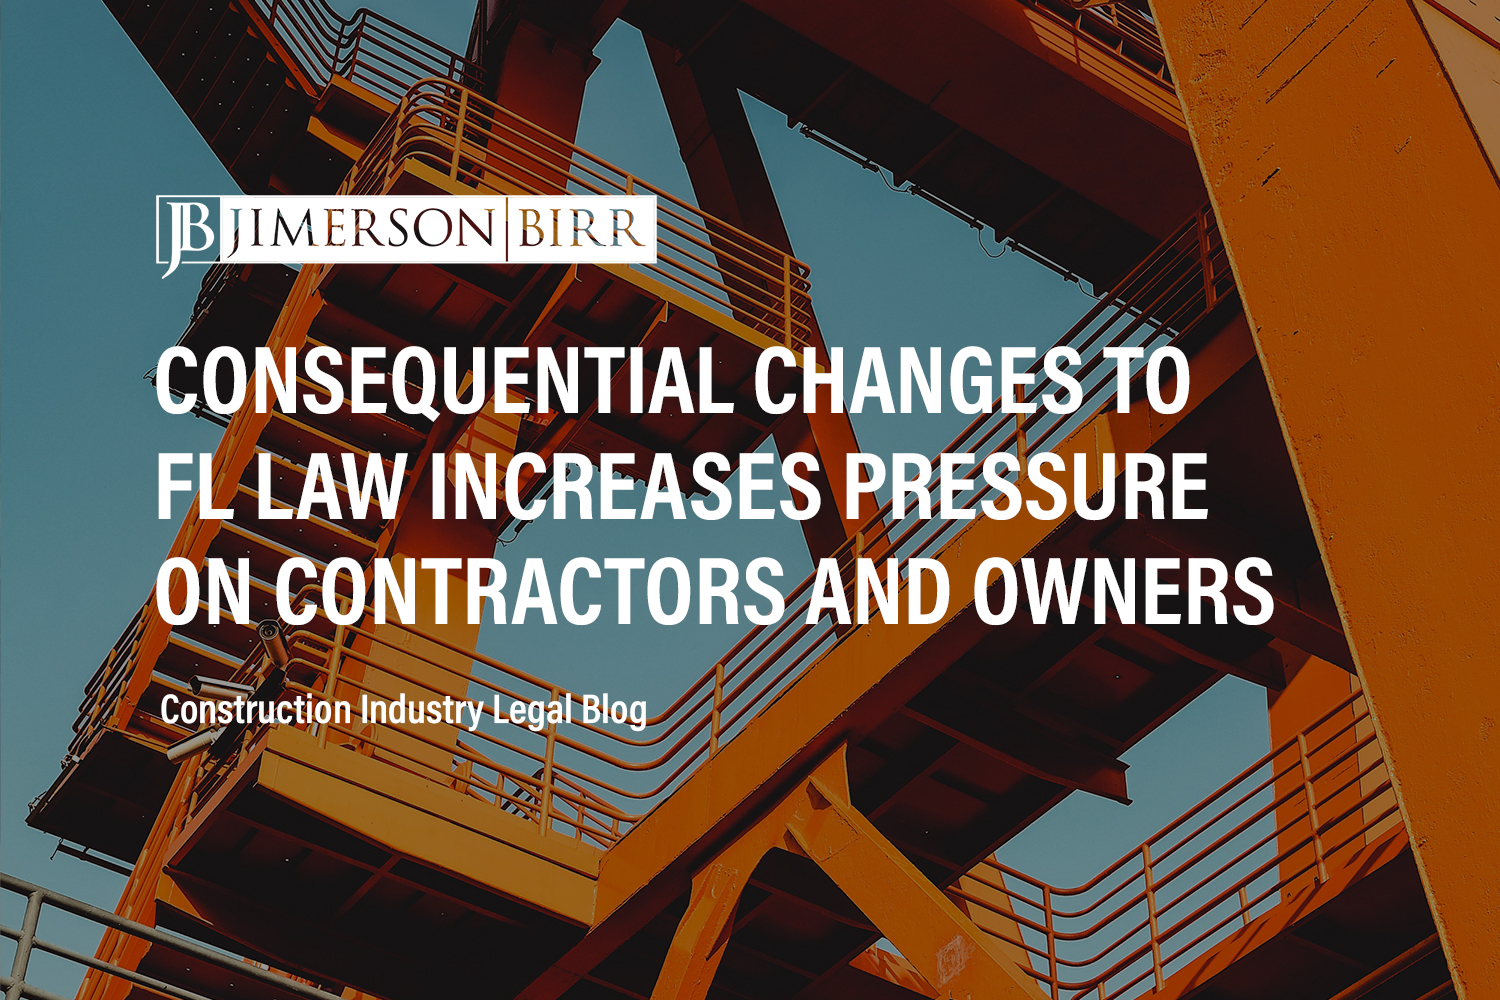 Contractors and Owners in Florida Beware: Higher Interest Rates and Increased Penalties for Withholding or Misapplying Construction Funds